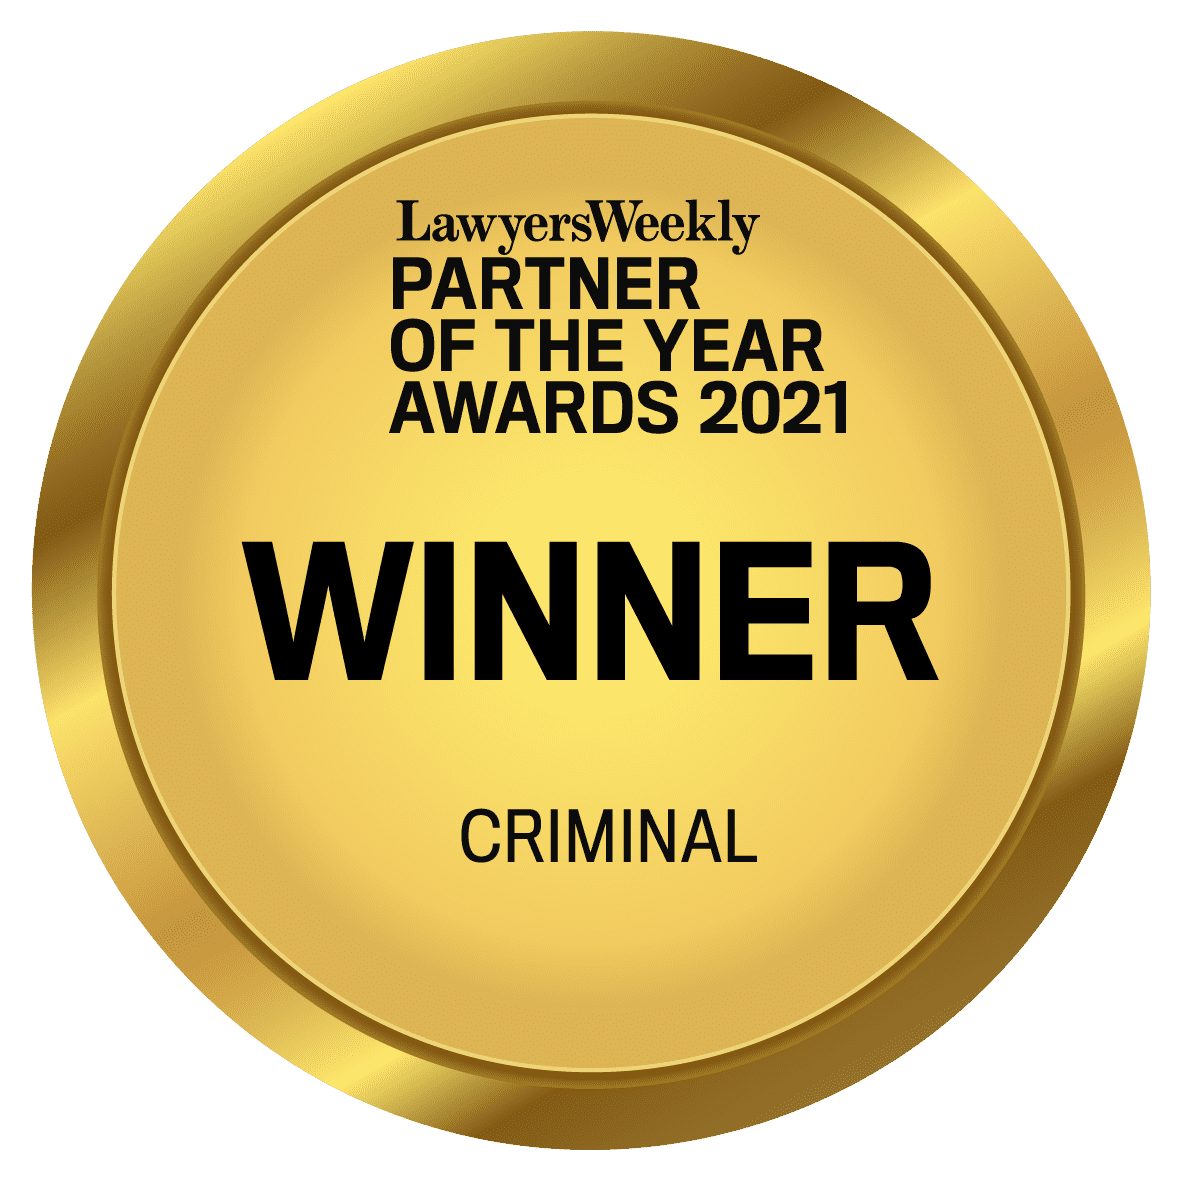 WINNER Lawyers Weekly Partner Of The Year Criminal Law 2021